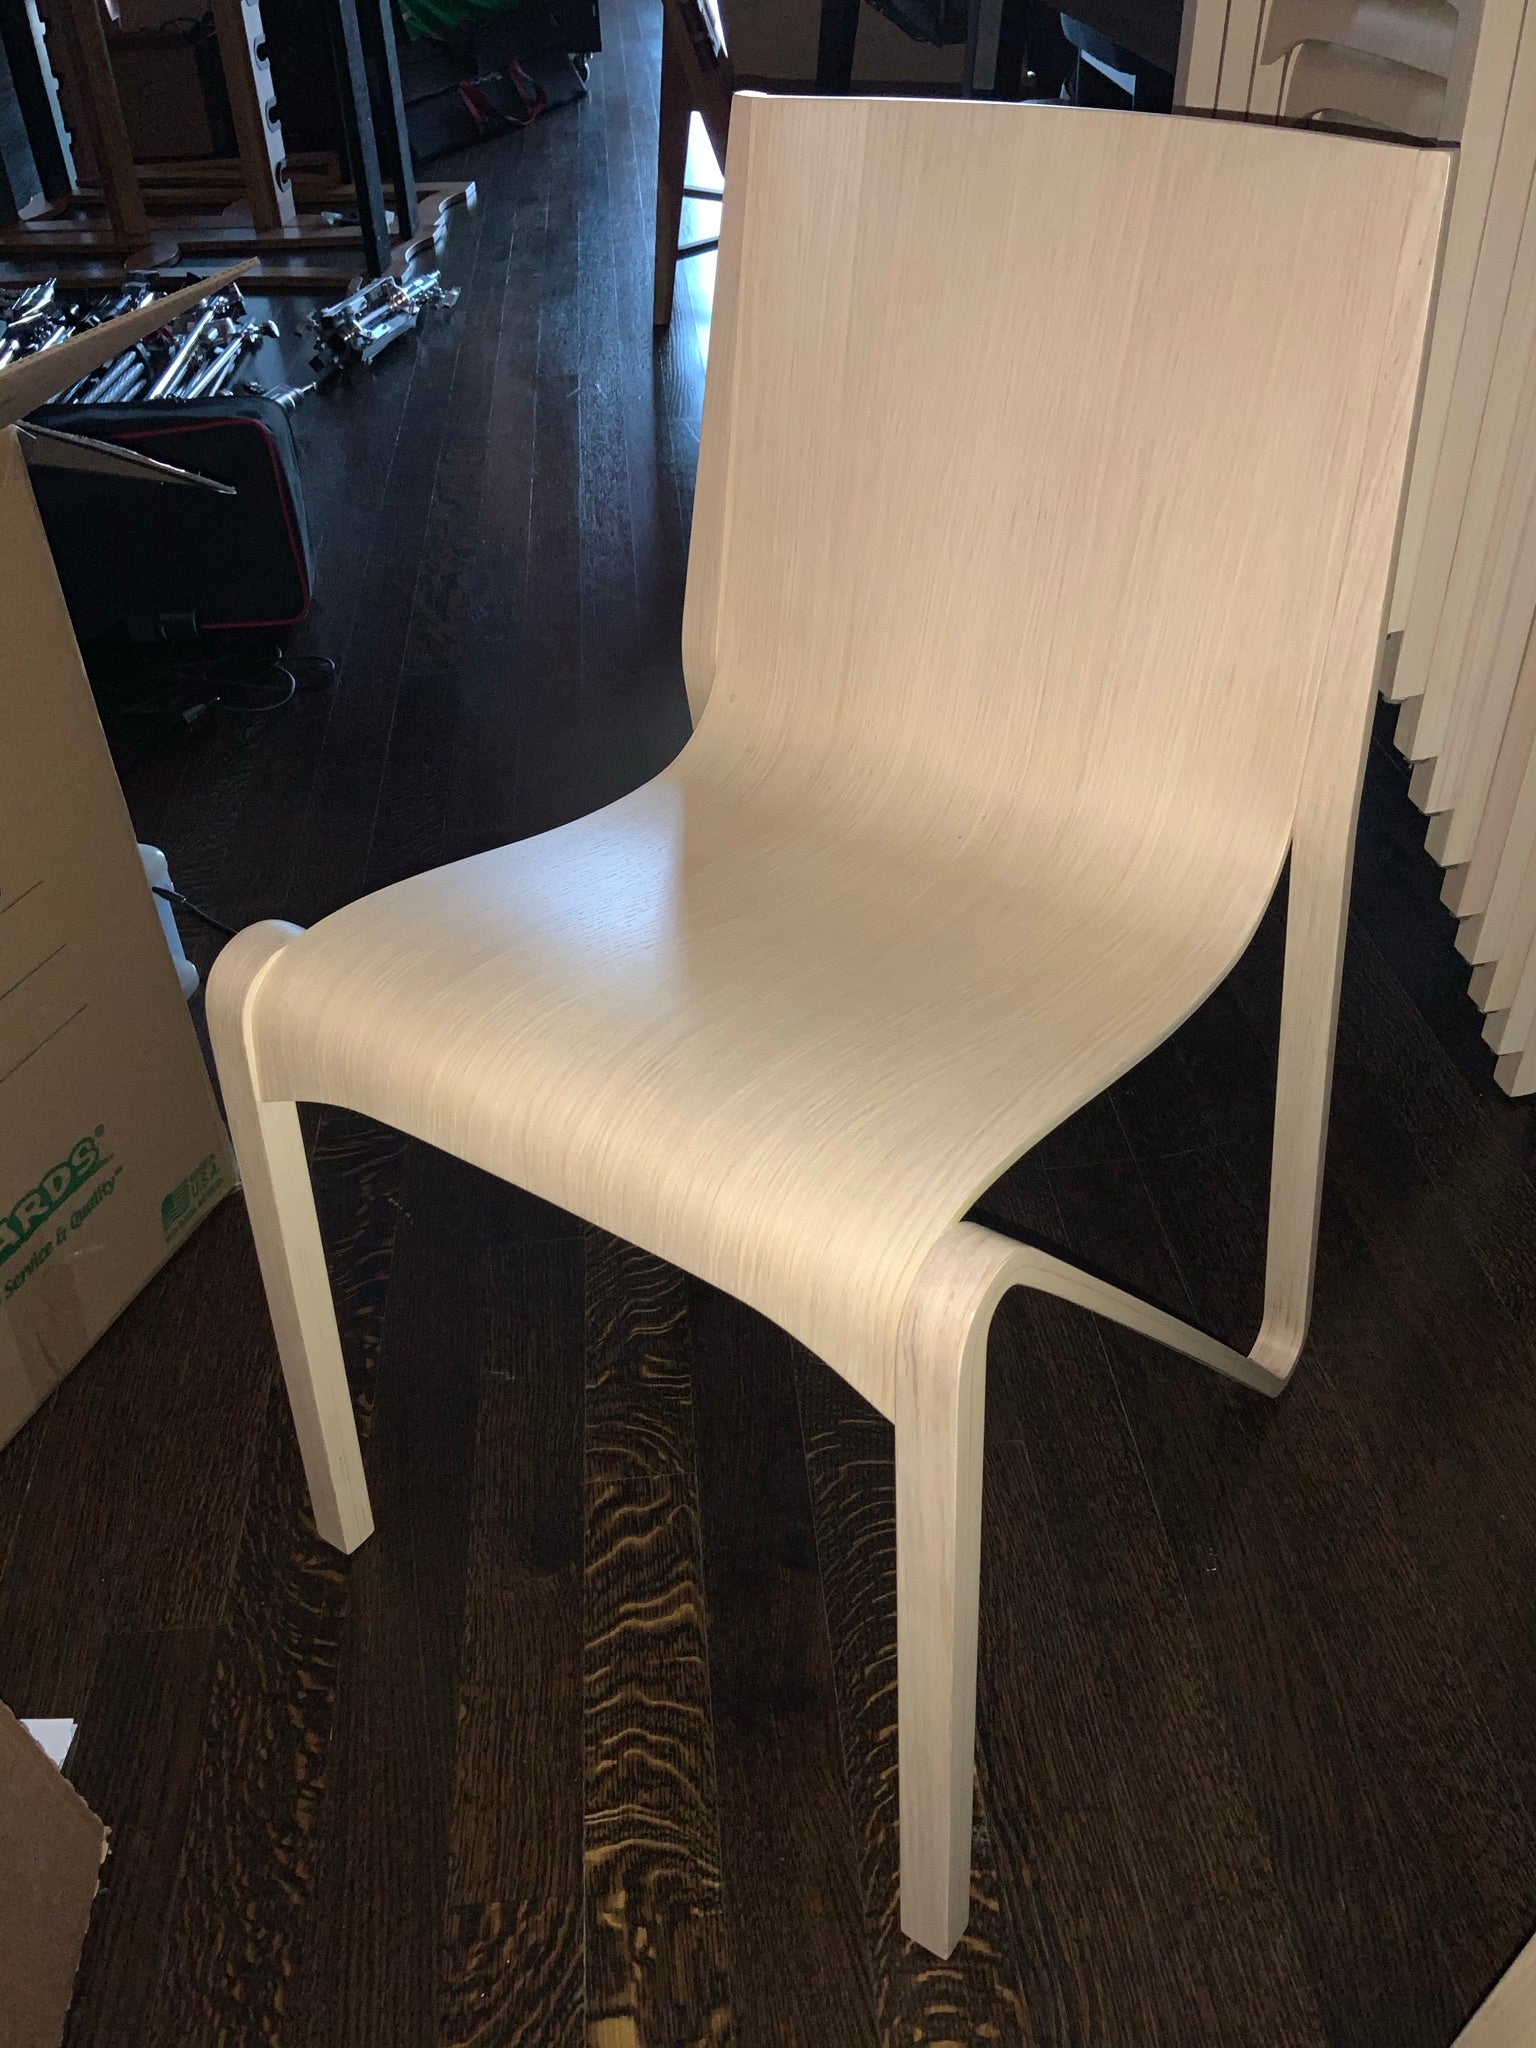 Brayton Stack Chair - Preowned - FOB Lincoln Park, IL (Min Purchase Qty = 25)